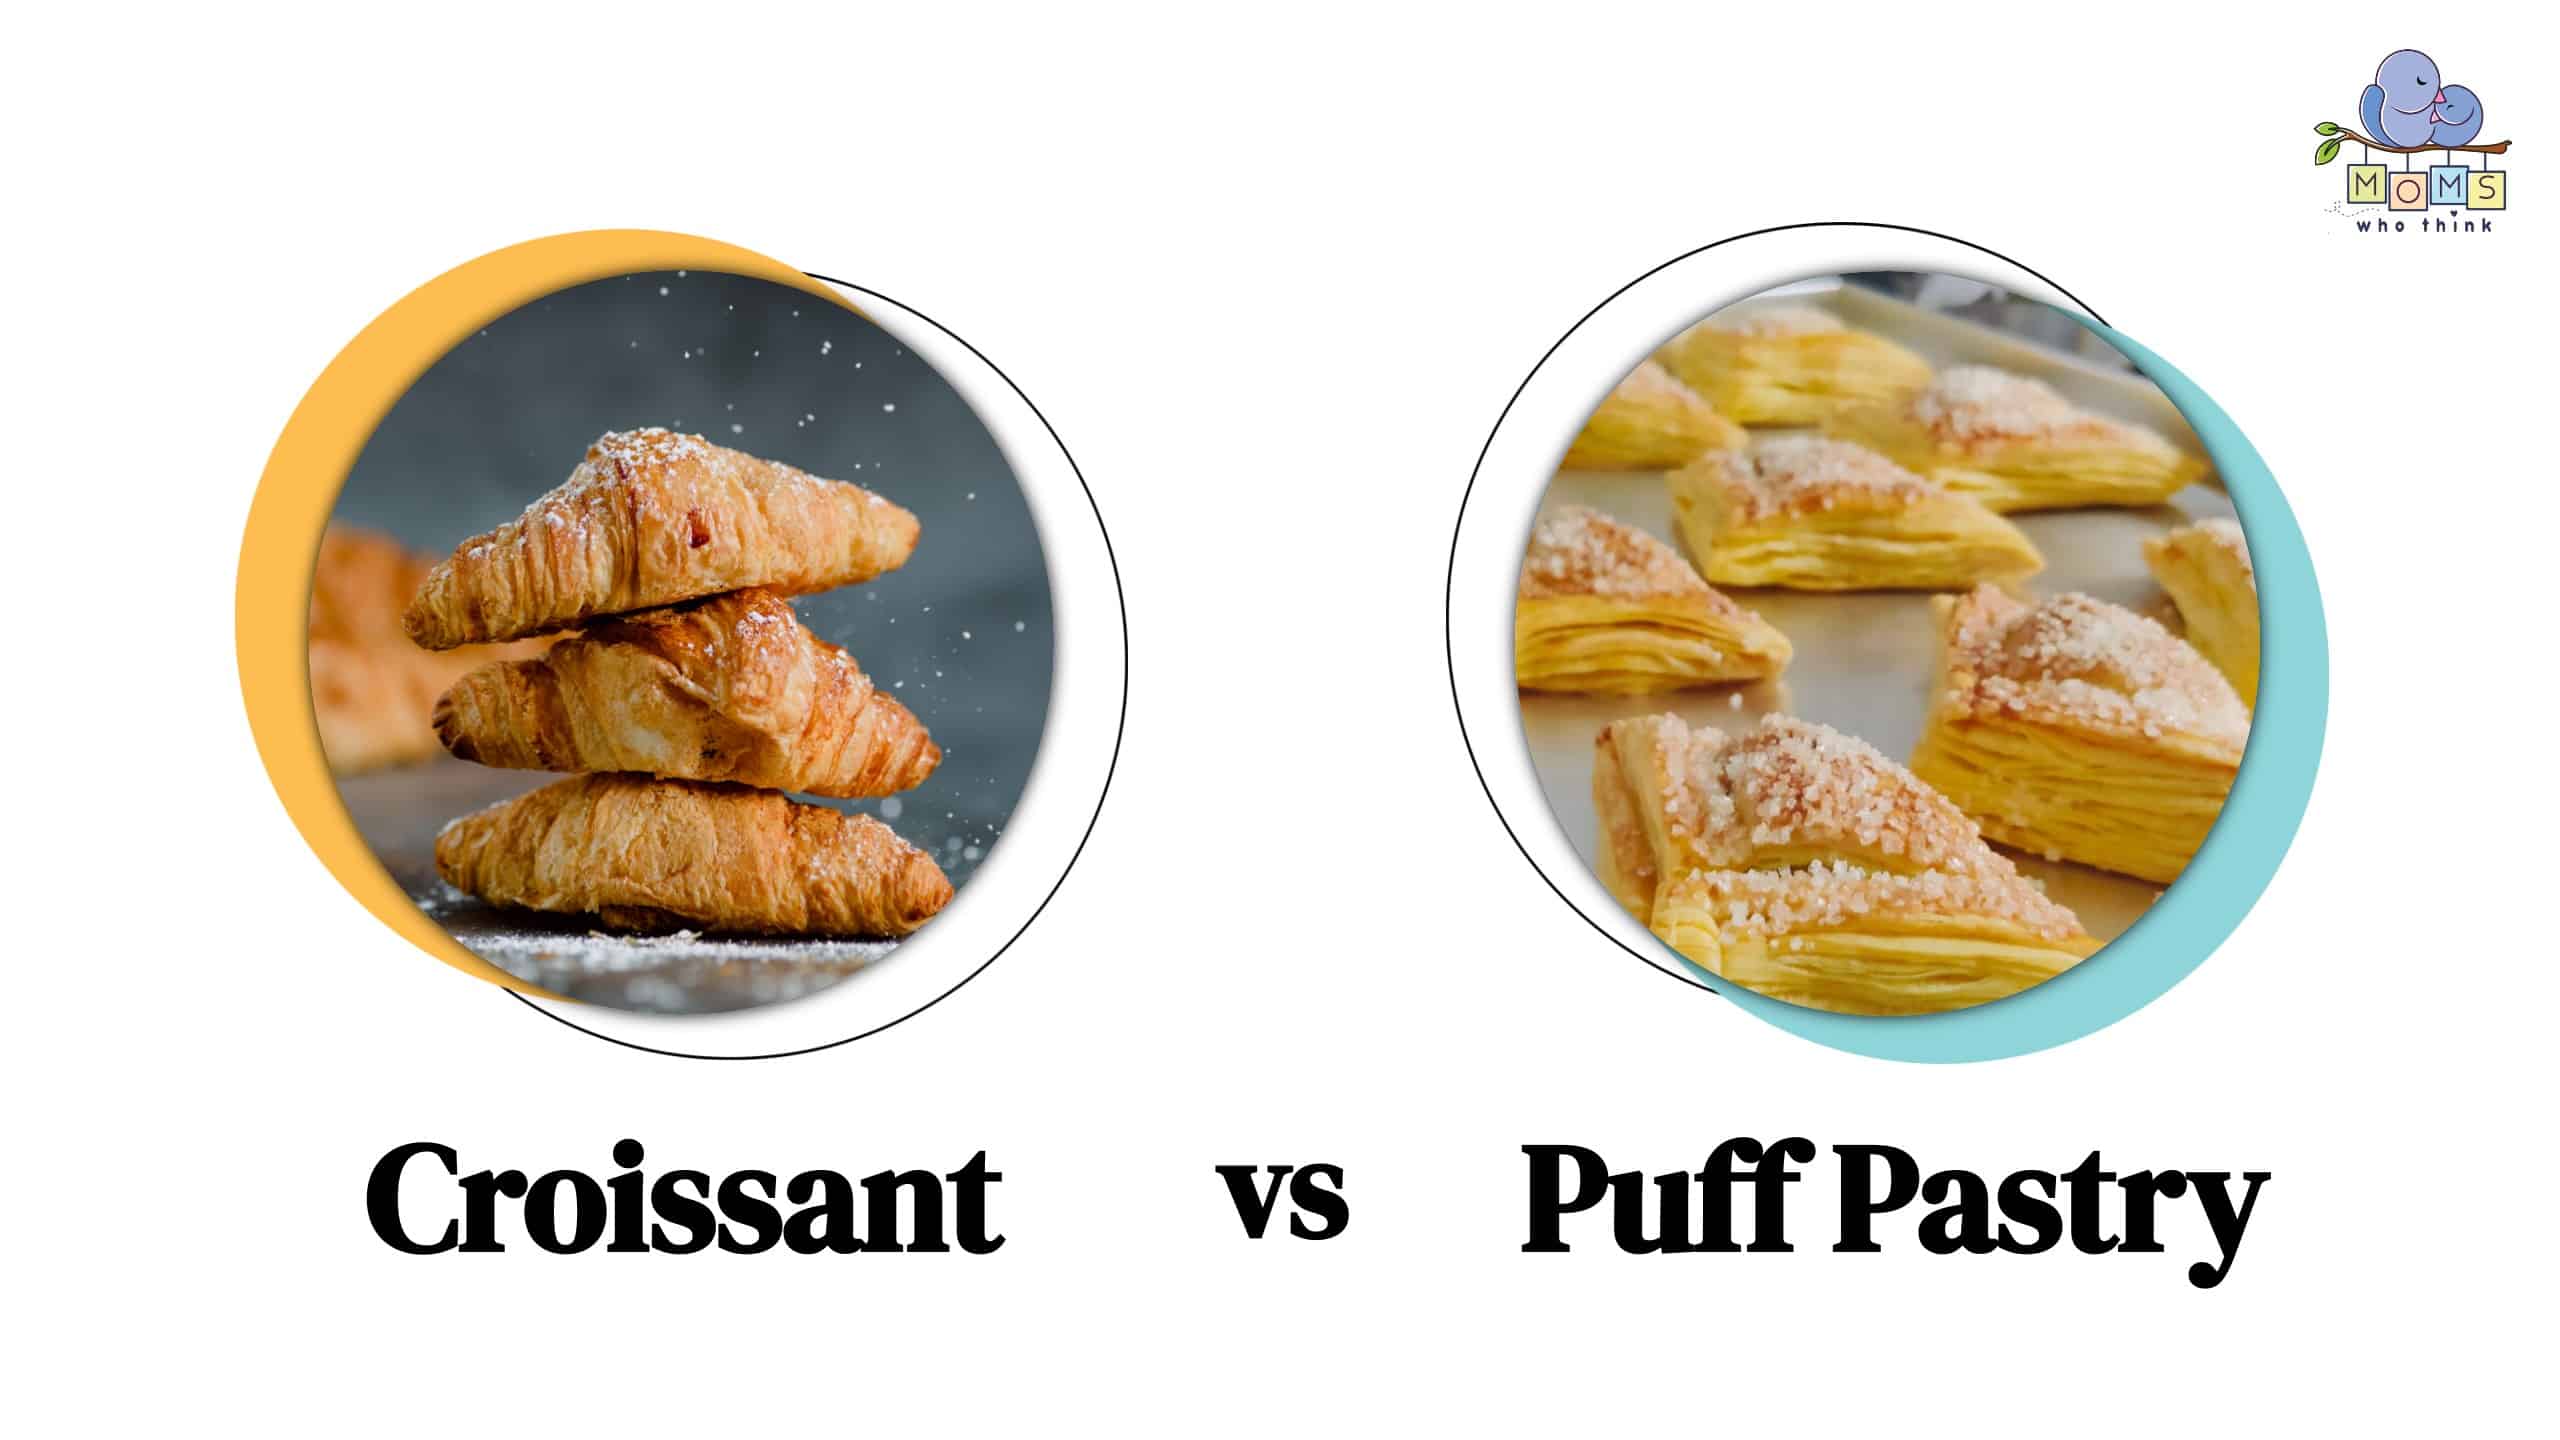 Croissant vs Puff Pastry